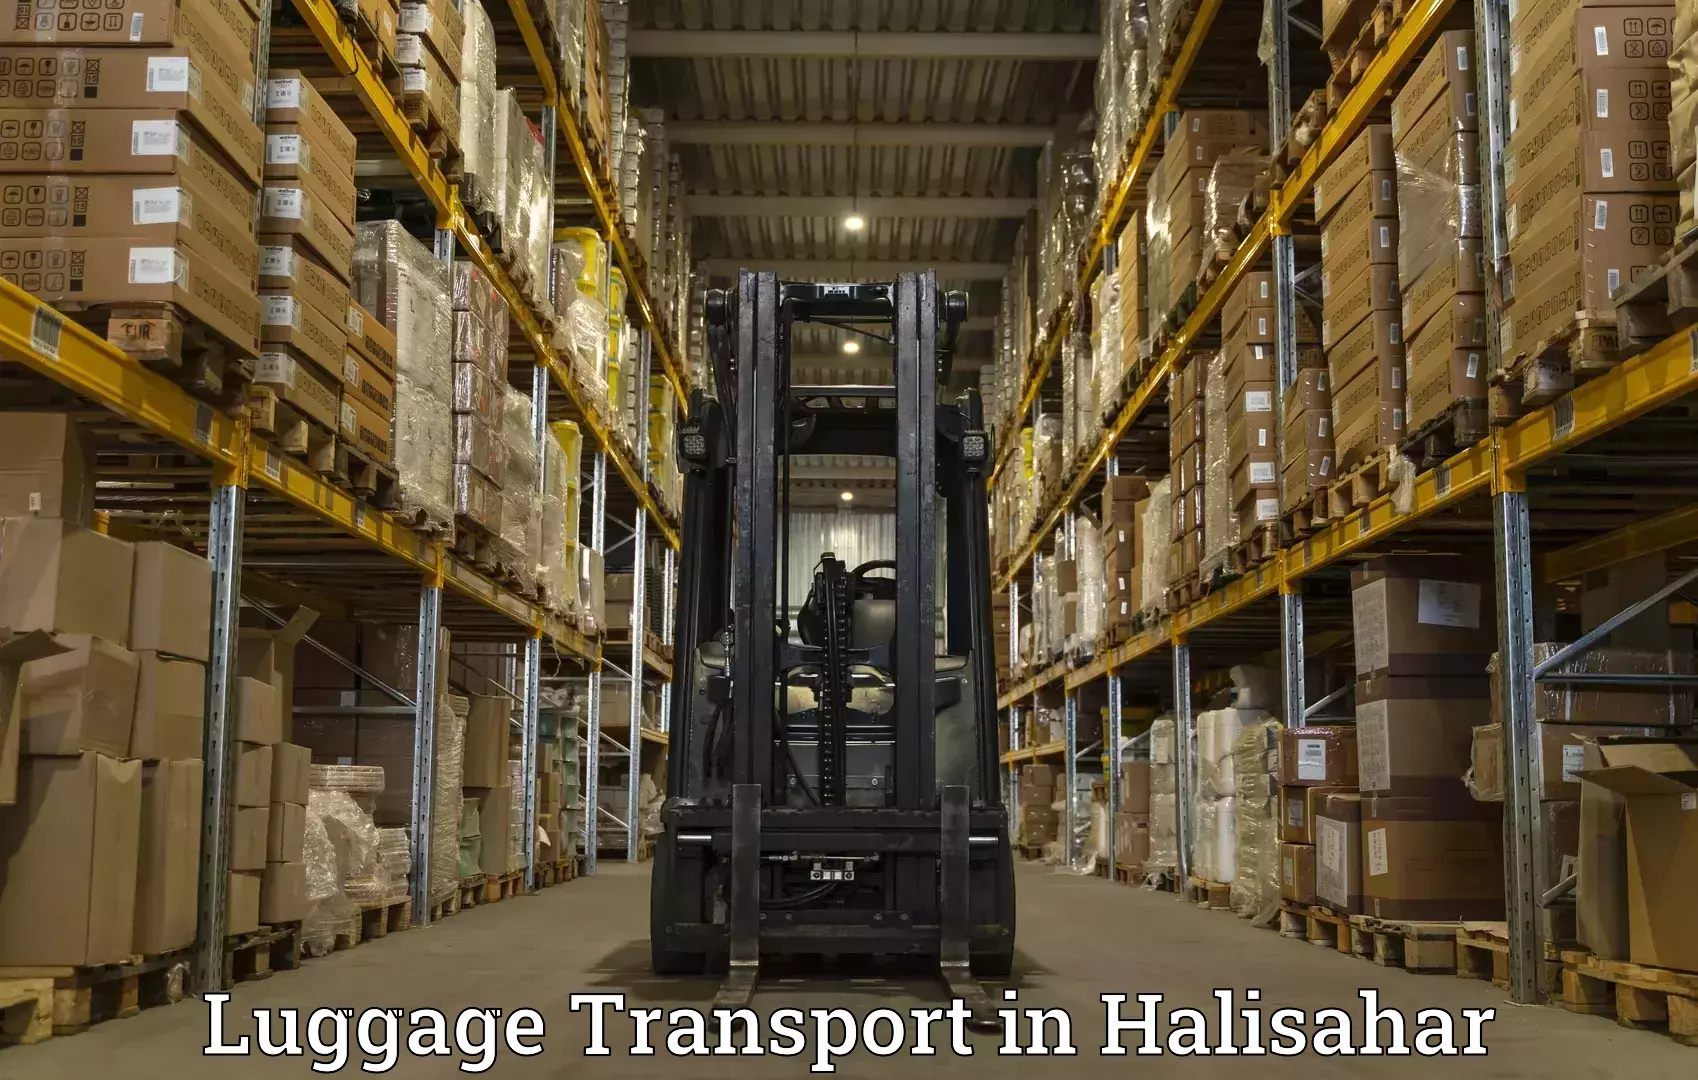 Luggage transport solutions in Halisahar